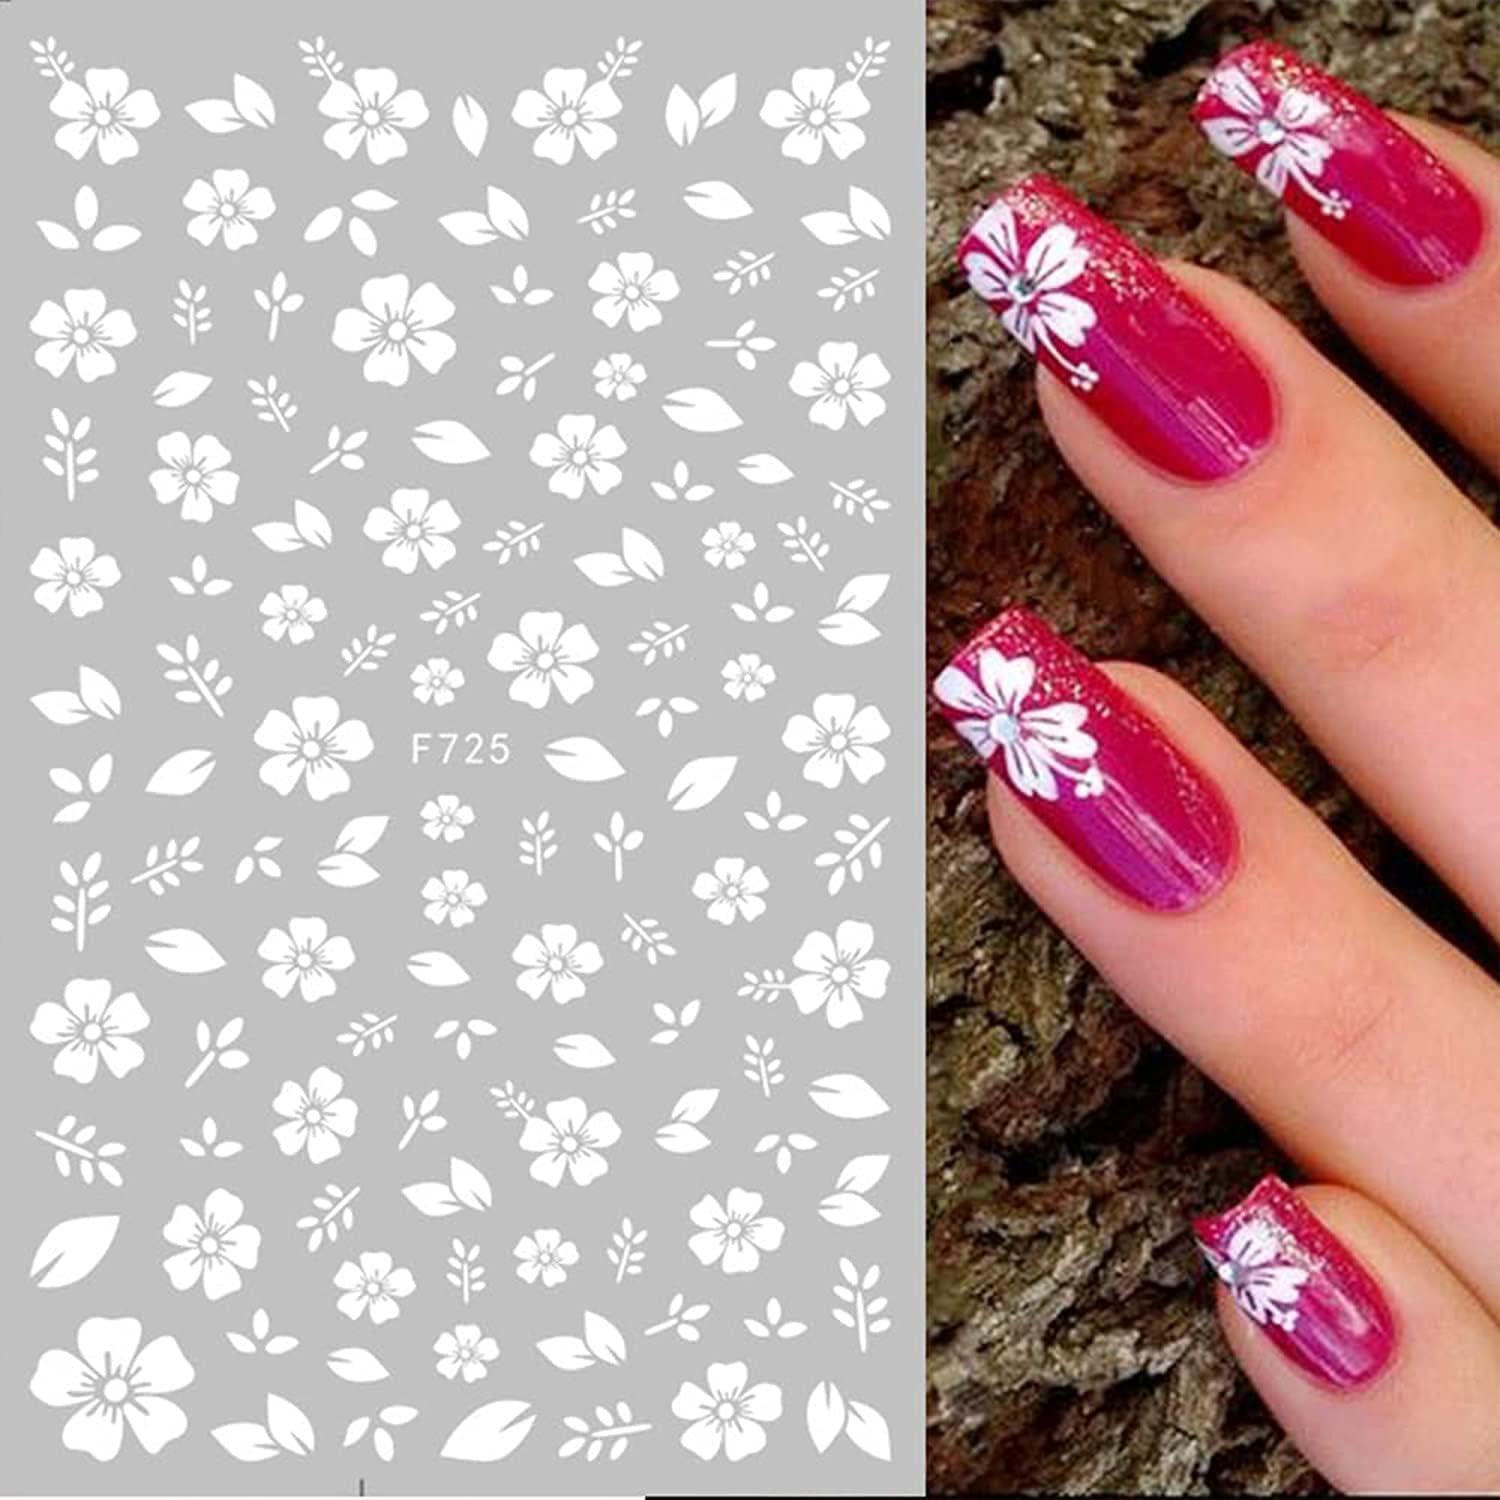 Hautn White Nail Stickers Flower Nail Art Stickers, 4 Sheets White Cherry Blossom Nail Decals 3D Self-Adhesive Nail Art Supplies Manicure Tips Accessories